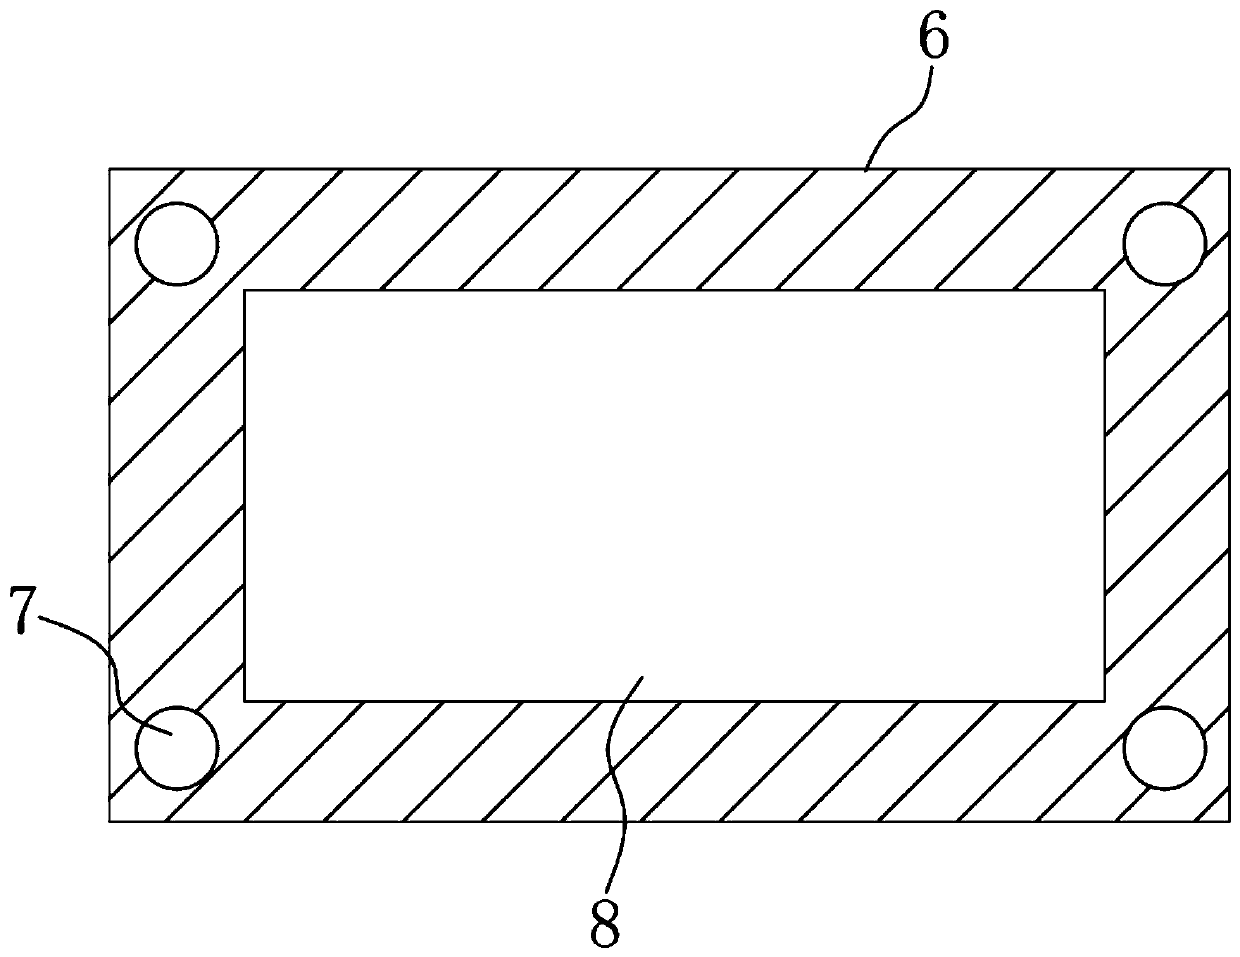 Filter cloth positioning and cutting device